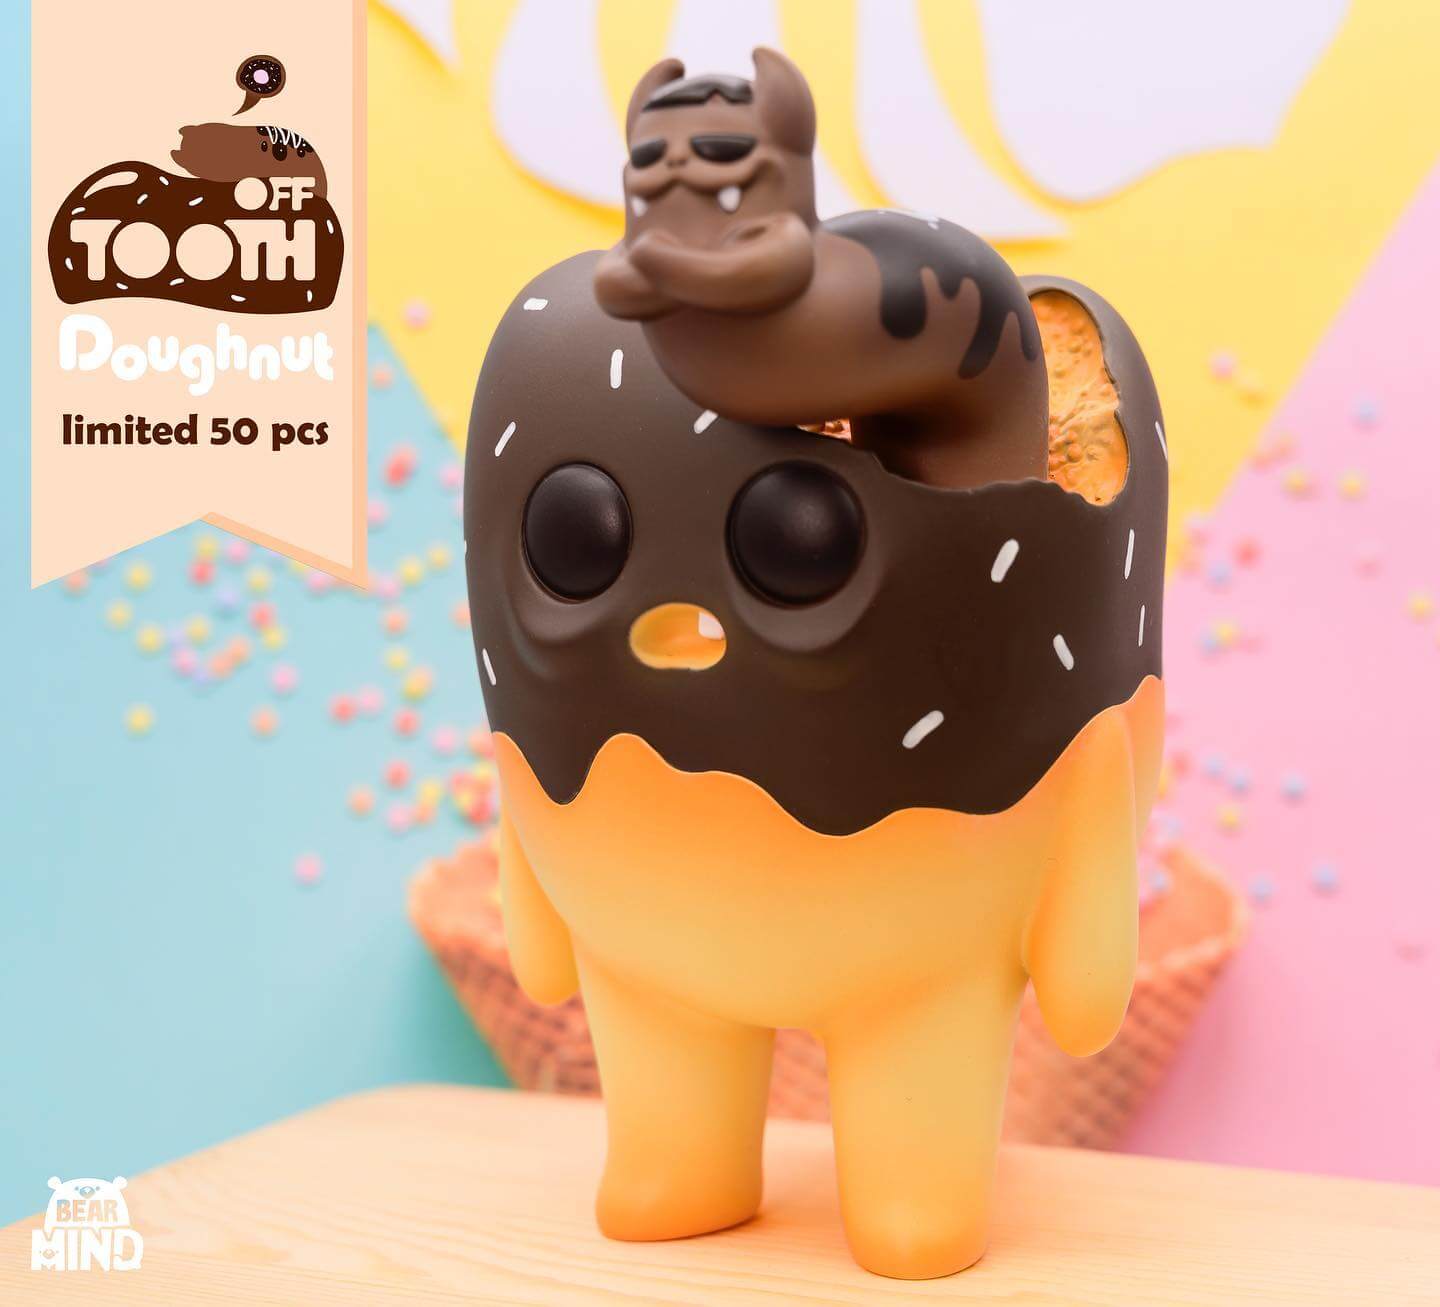 Toy figurine of a crocodile wearing a doughnut hat emerging from an egg, part of the limited edition Tooth off - Doughnut Tooth collection by Bear In Mind Toys.